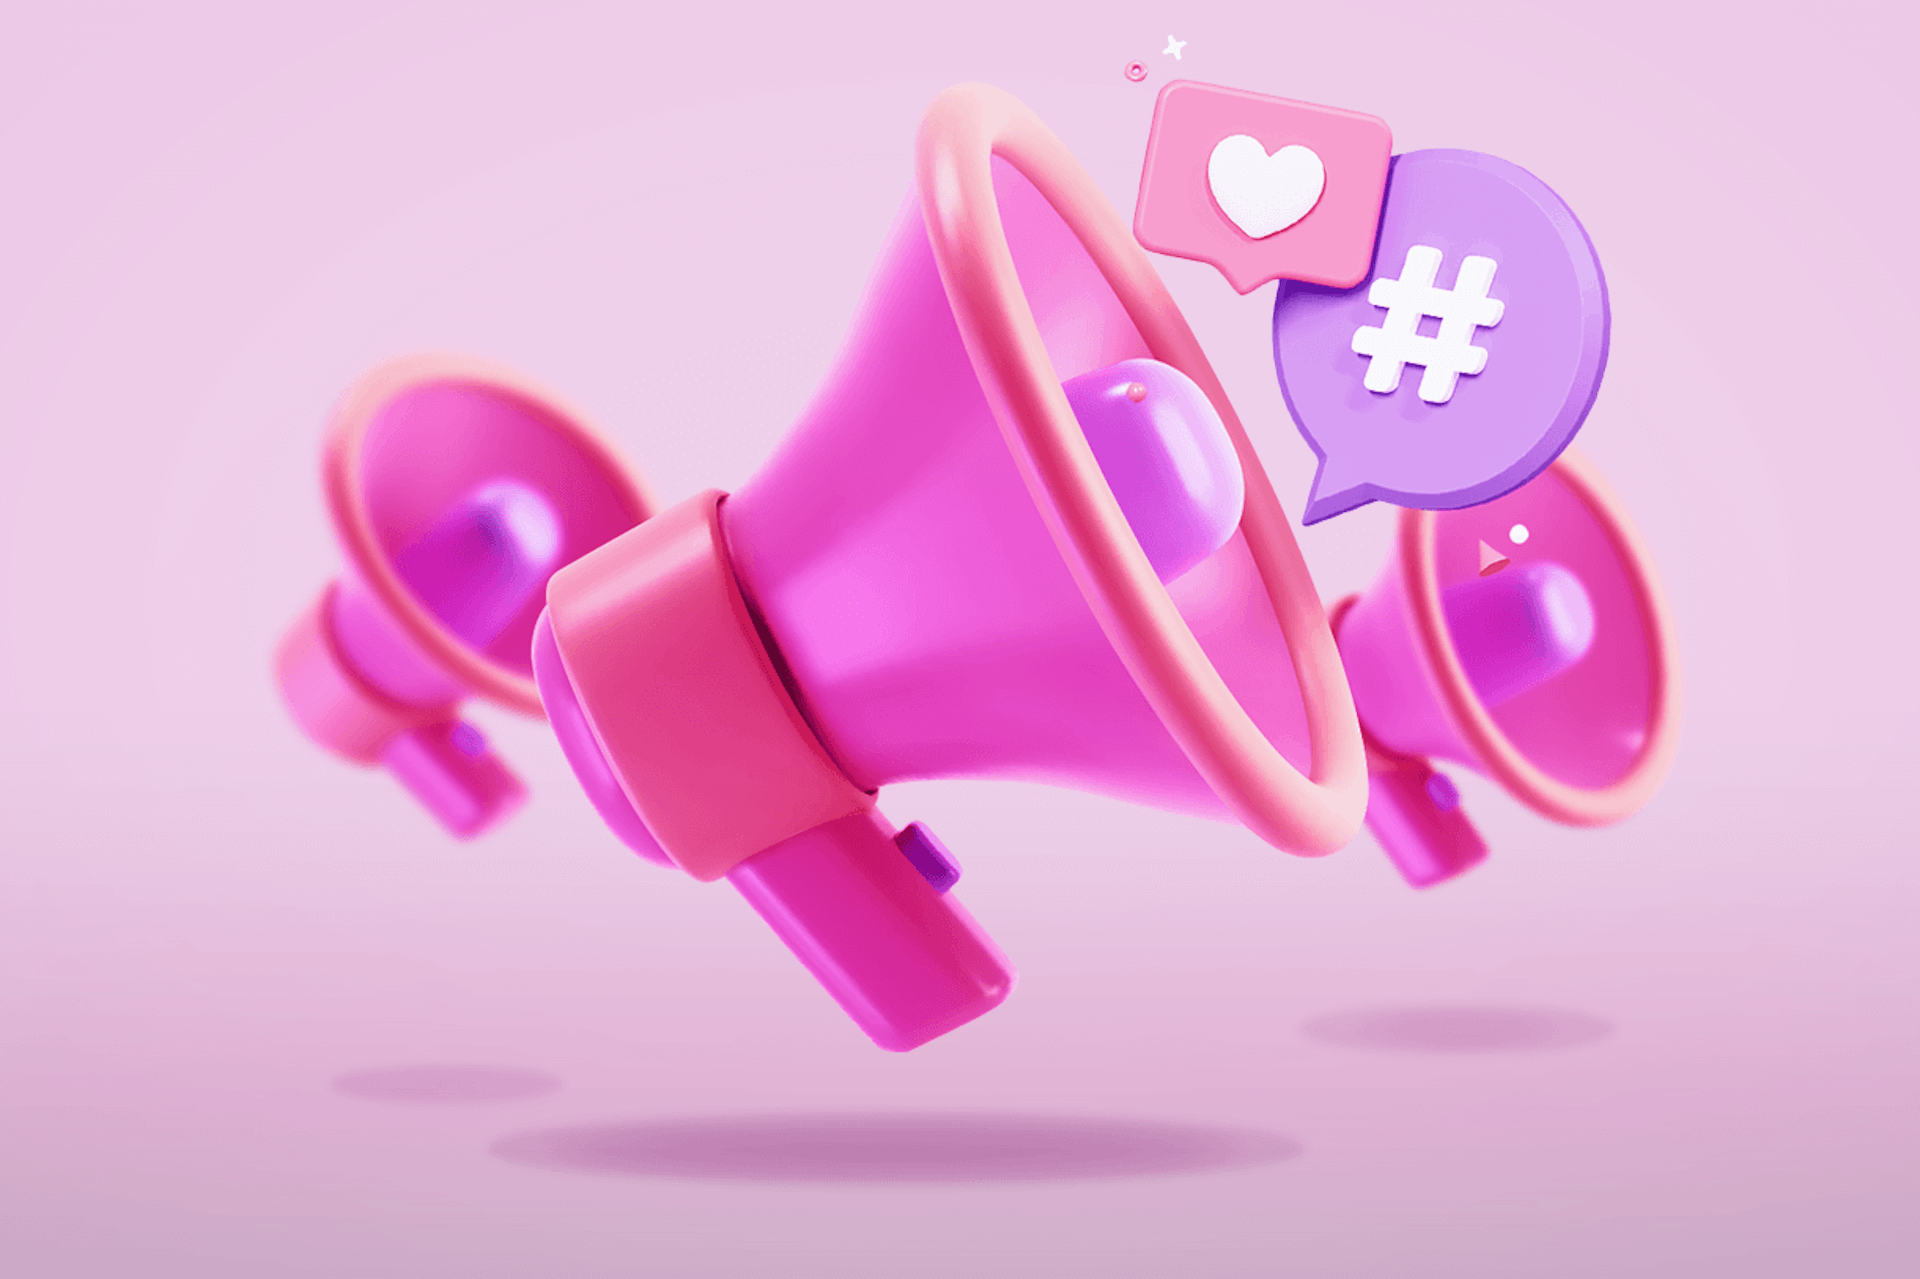 Illustration of three bright pink megaphone in varying sizes. The largest megaphone is in the center and there are symbols being blasted out of it such as a heart icon and a hashtag symbol.